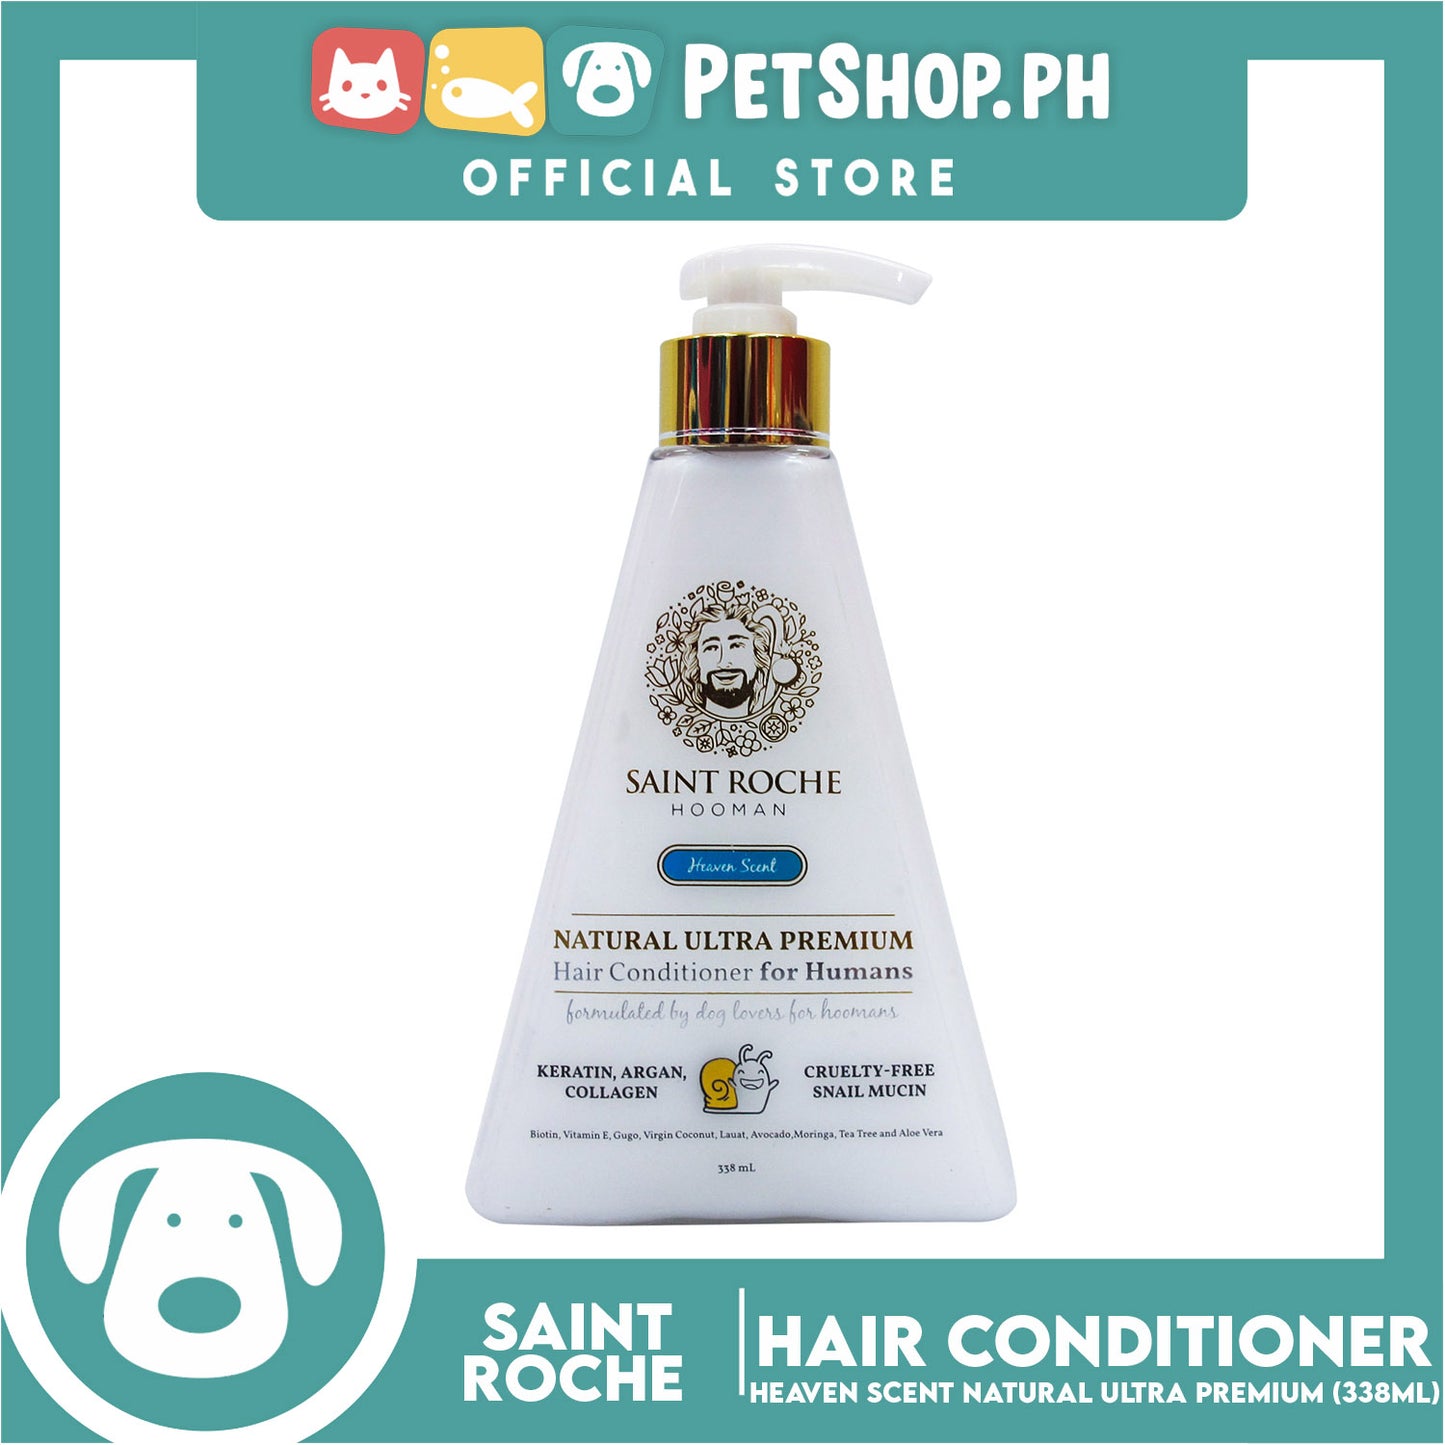 Saint Roche Hooman Natural Ultra Premium Conditioner (Heaven Scent) 338ml For The Skin and Coat of Your Dogs